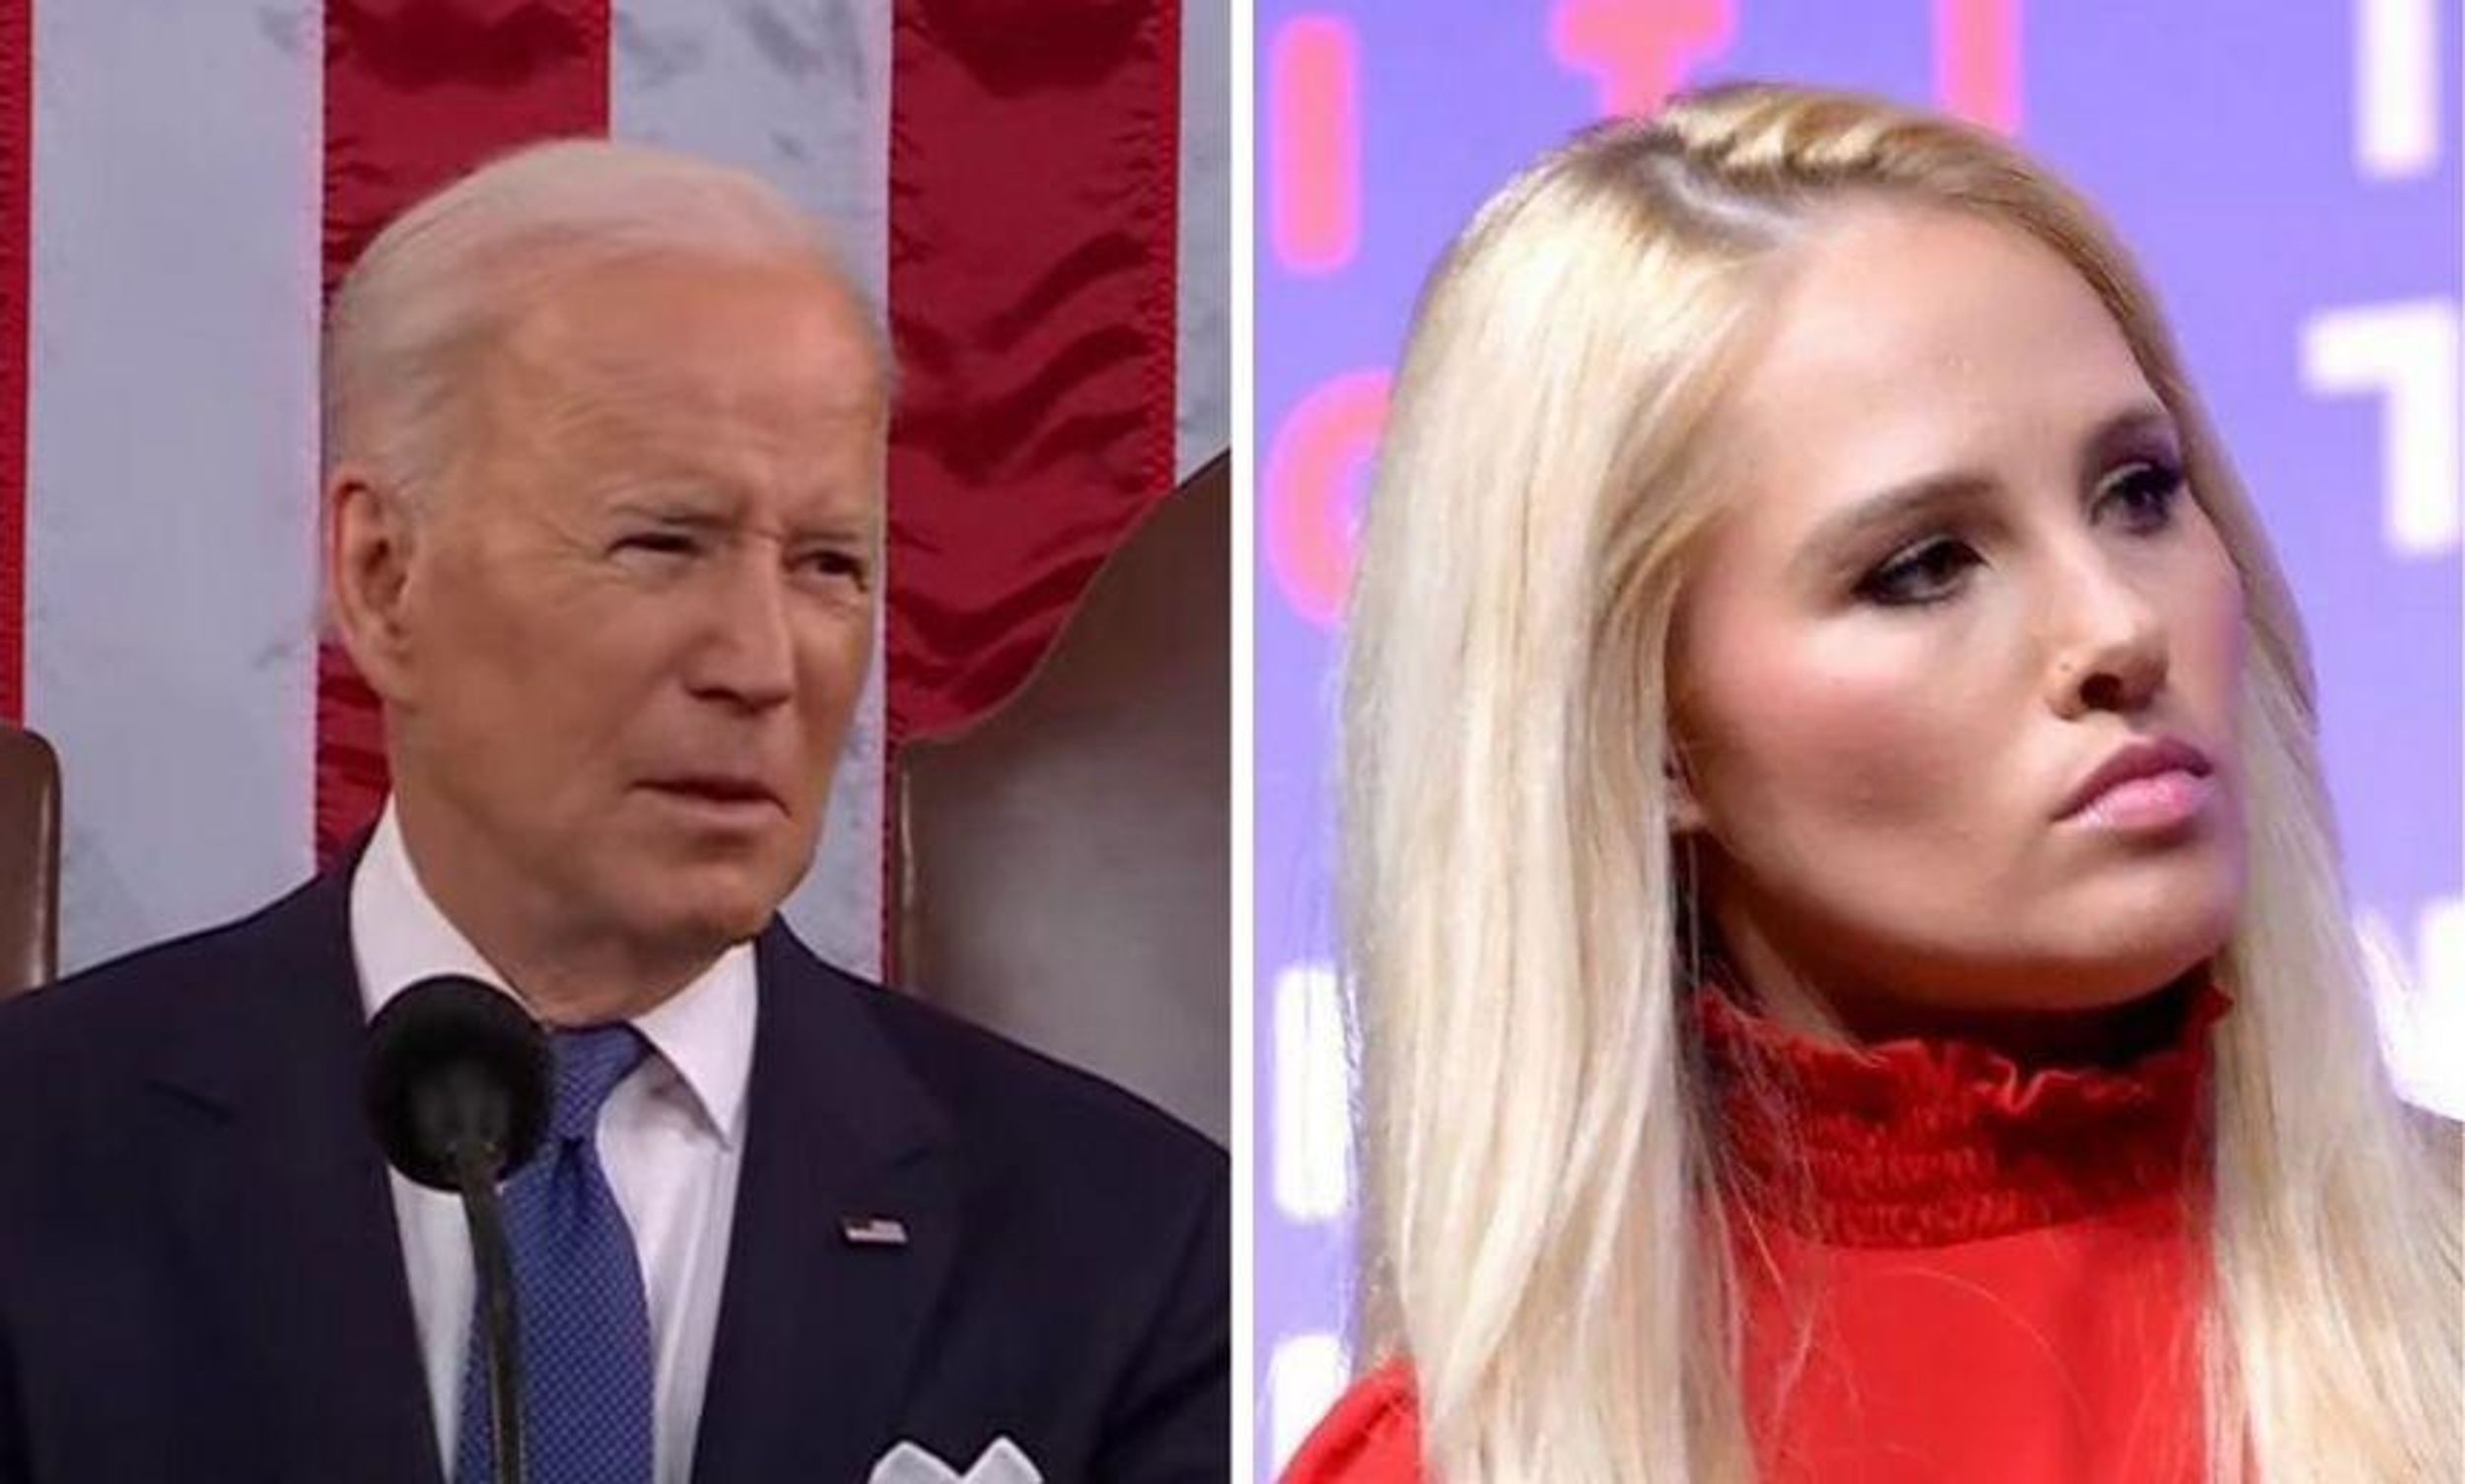 Tomi Lahren Tried to Own Biden With Tweet Equating Putin's Invasion With 'Wearing Face Diapers'—It Did Not Go Well